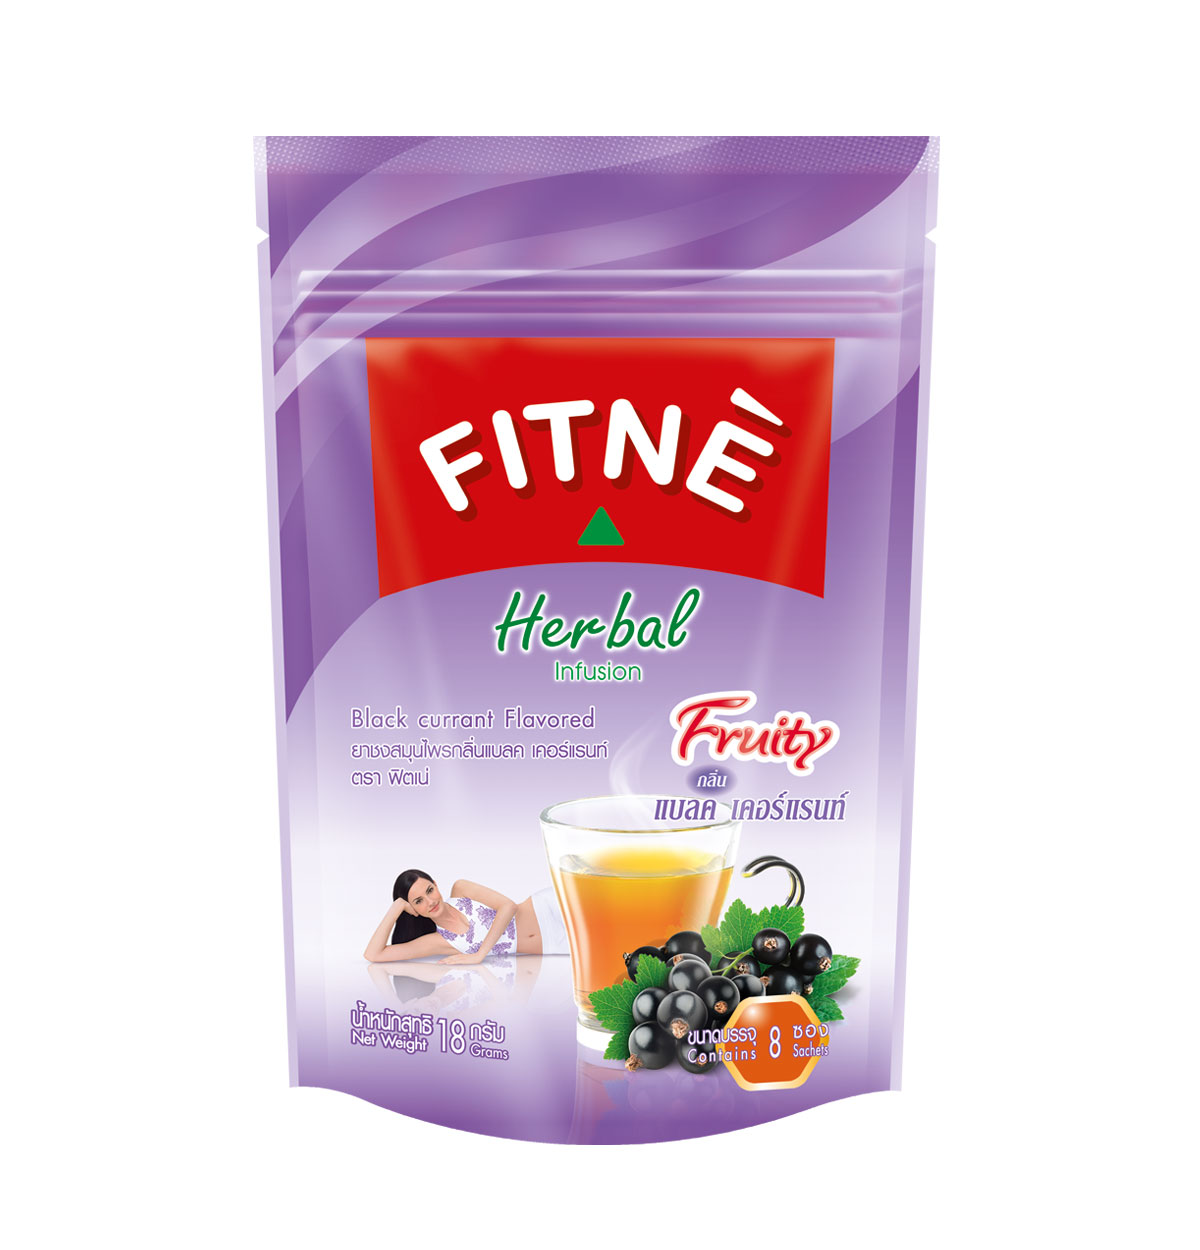 FITNE' Herbal Infusion Tea Black currant Flavored 2.25g.x8 Sachets